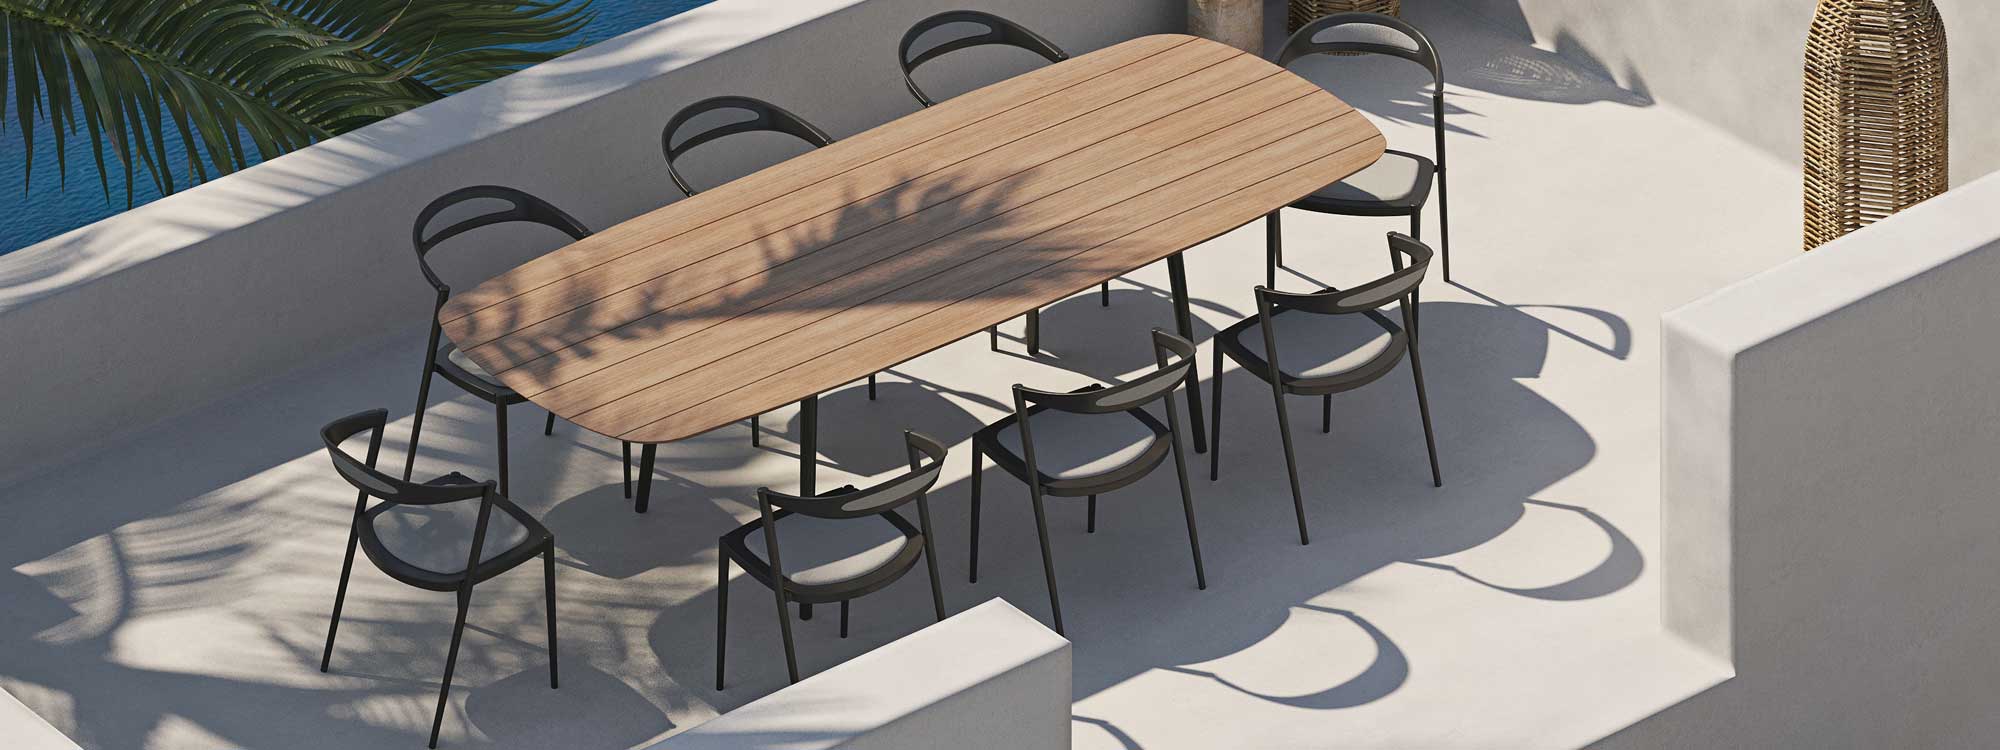 Image of Styletto teak garden table and aluminum chairs by Royal Botania